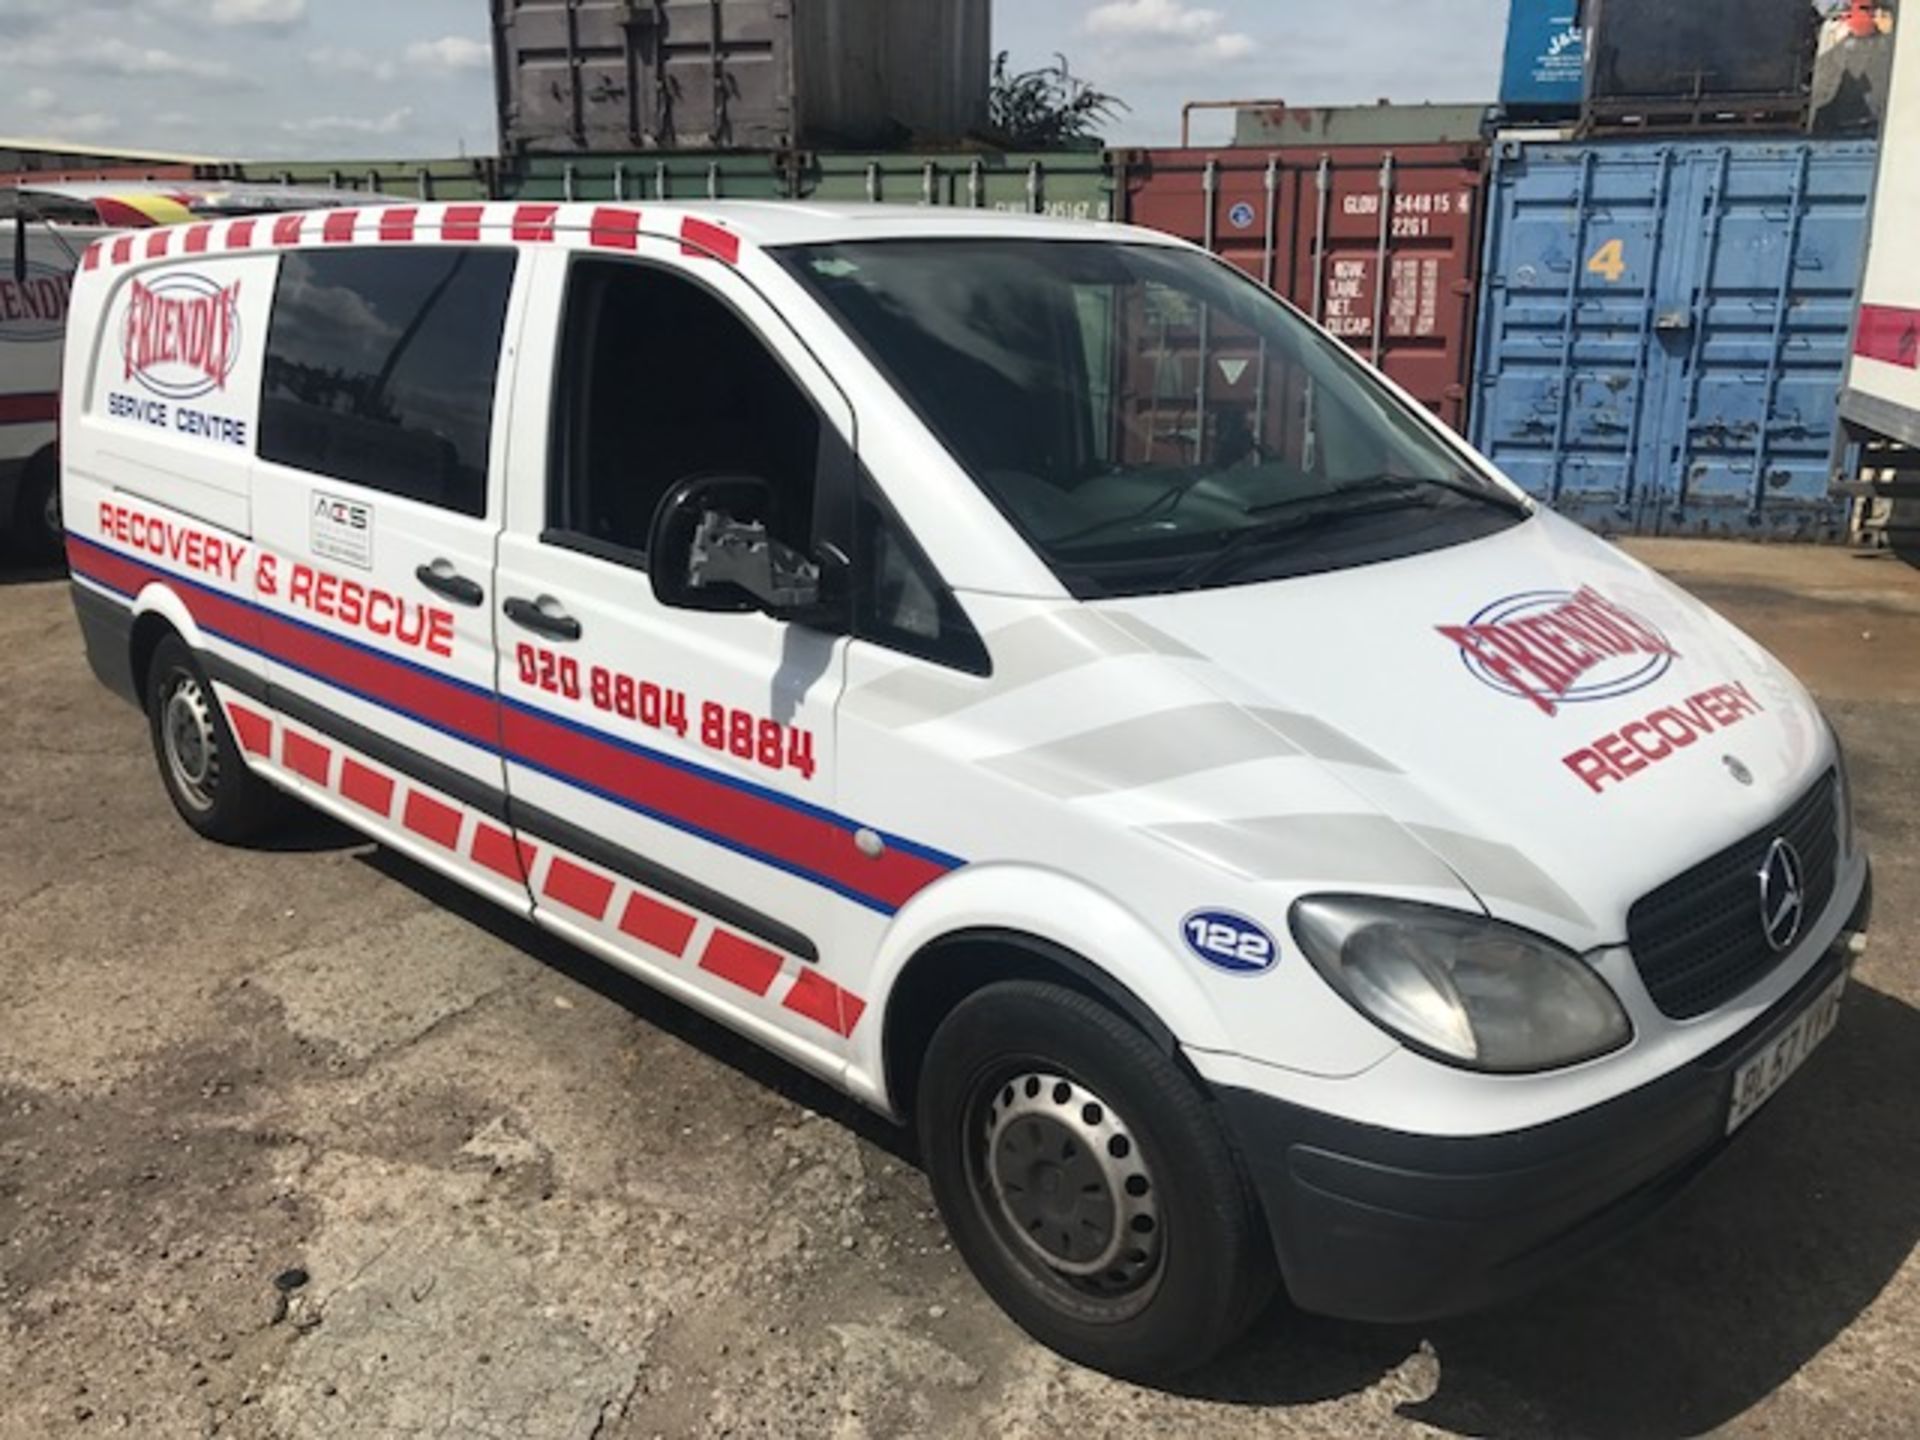 2007 Mercedes Vito crew cab five seater recovery and rescue vehicle complete with Mane LPD Limited